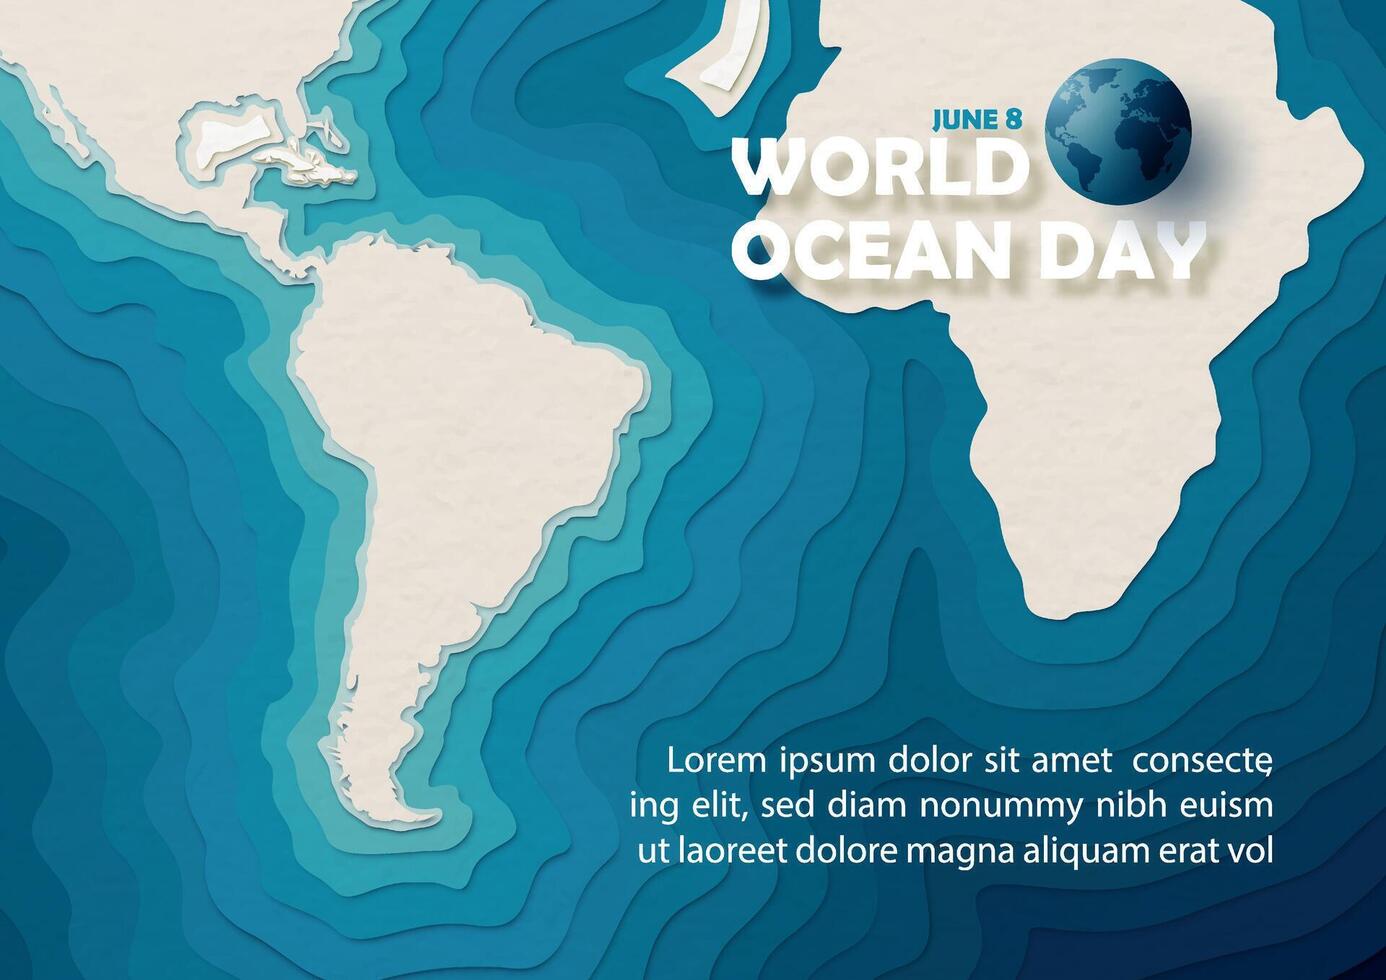 Crop of world map in paper cut and layers style with ocean day wording and example texts on paper pattern background. Poster campaign of world ocean day in vector design.